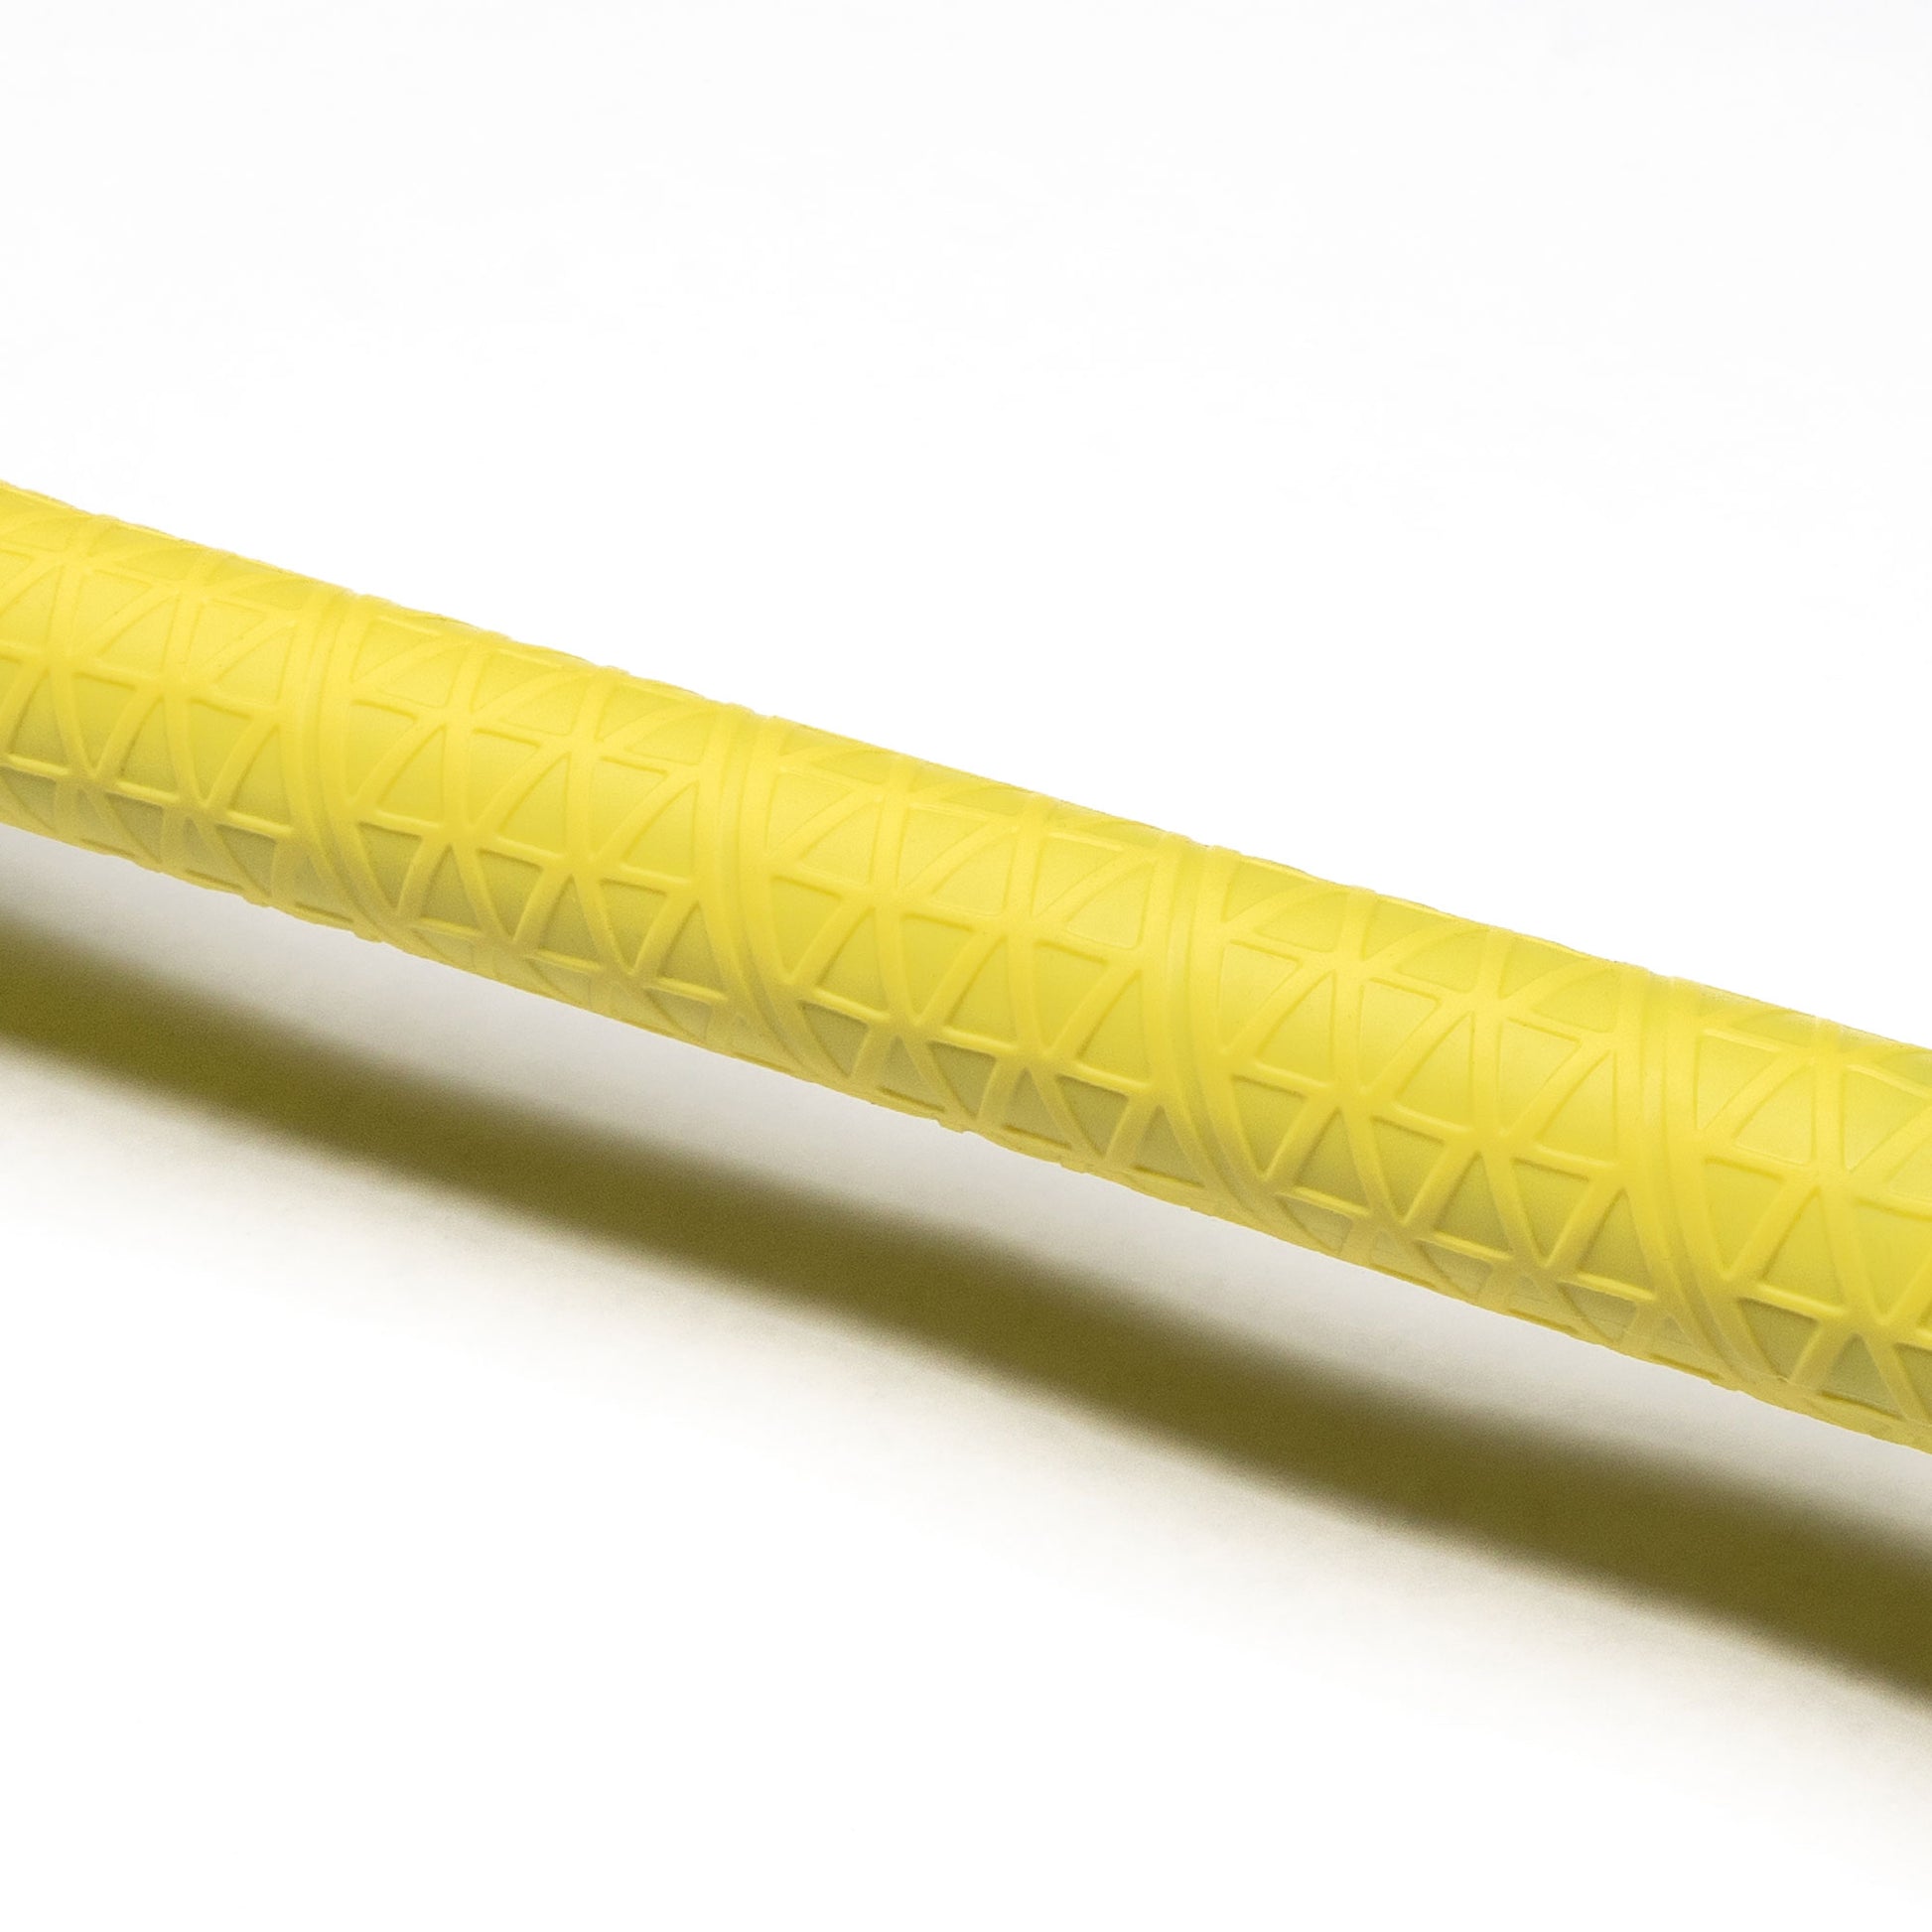 New Soft Compound - Pure Grips DTX Standard Grips - NEON Yellow x 13